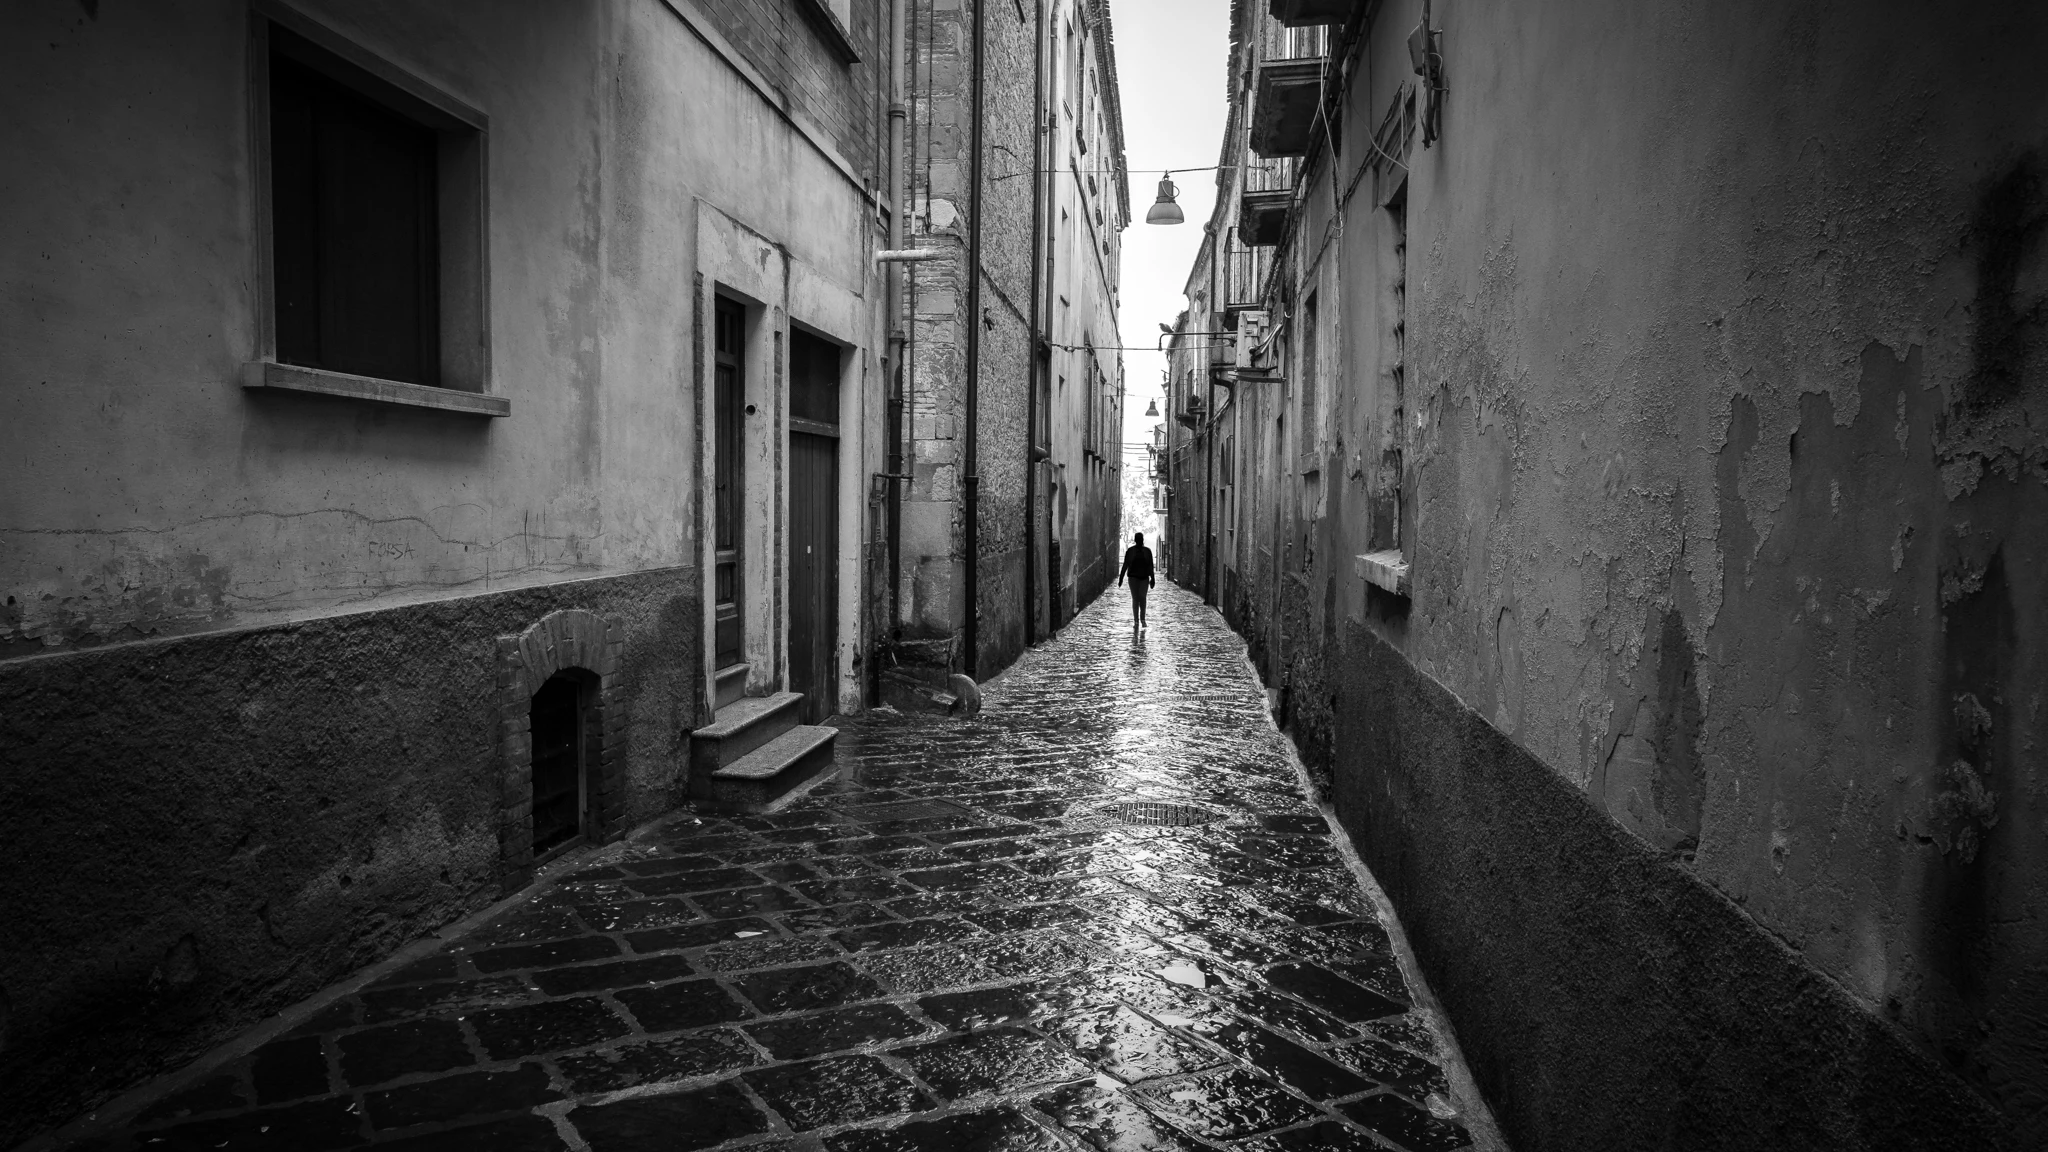 A shadow - Troia, Italy - Black and white street photography